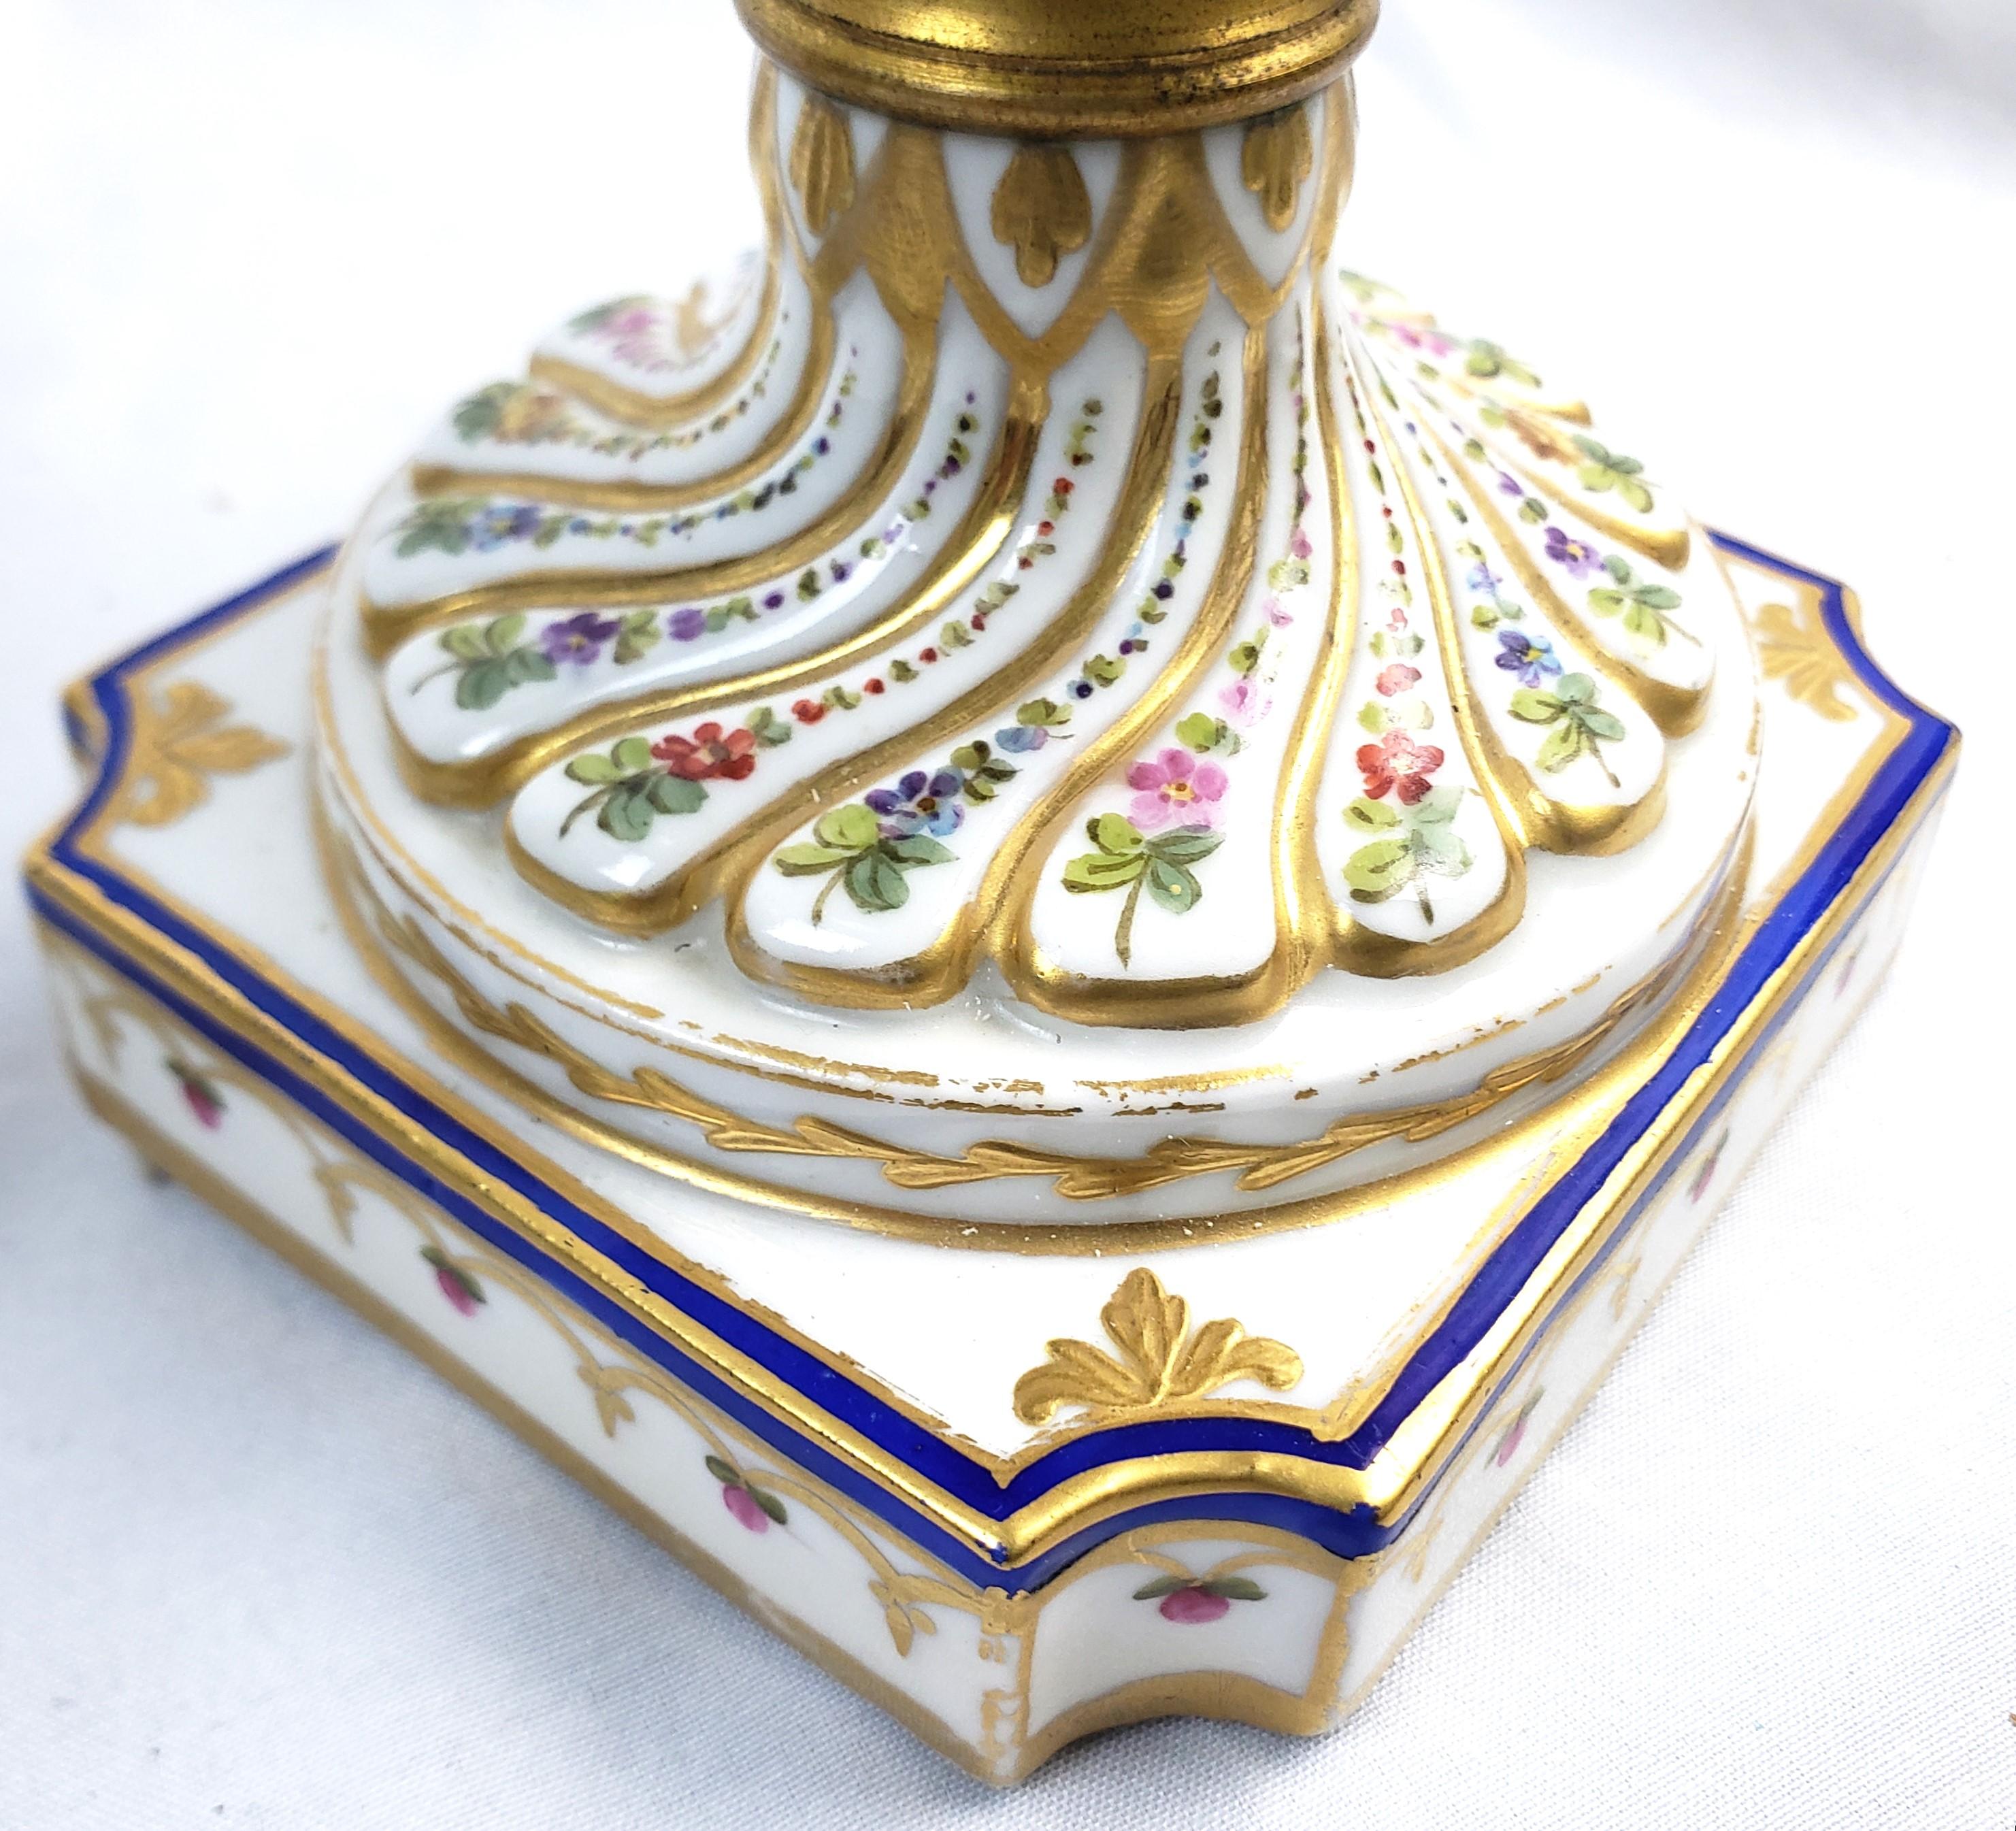 Pair of Antique Sevres Styled Covered Urns with Ornate Hand-Painted Decoration For Sale 10